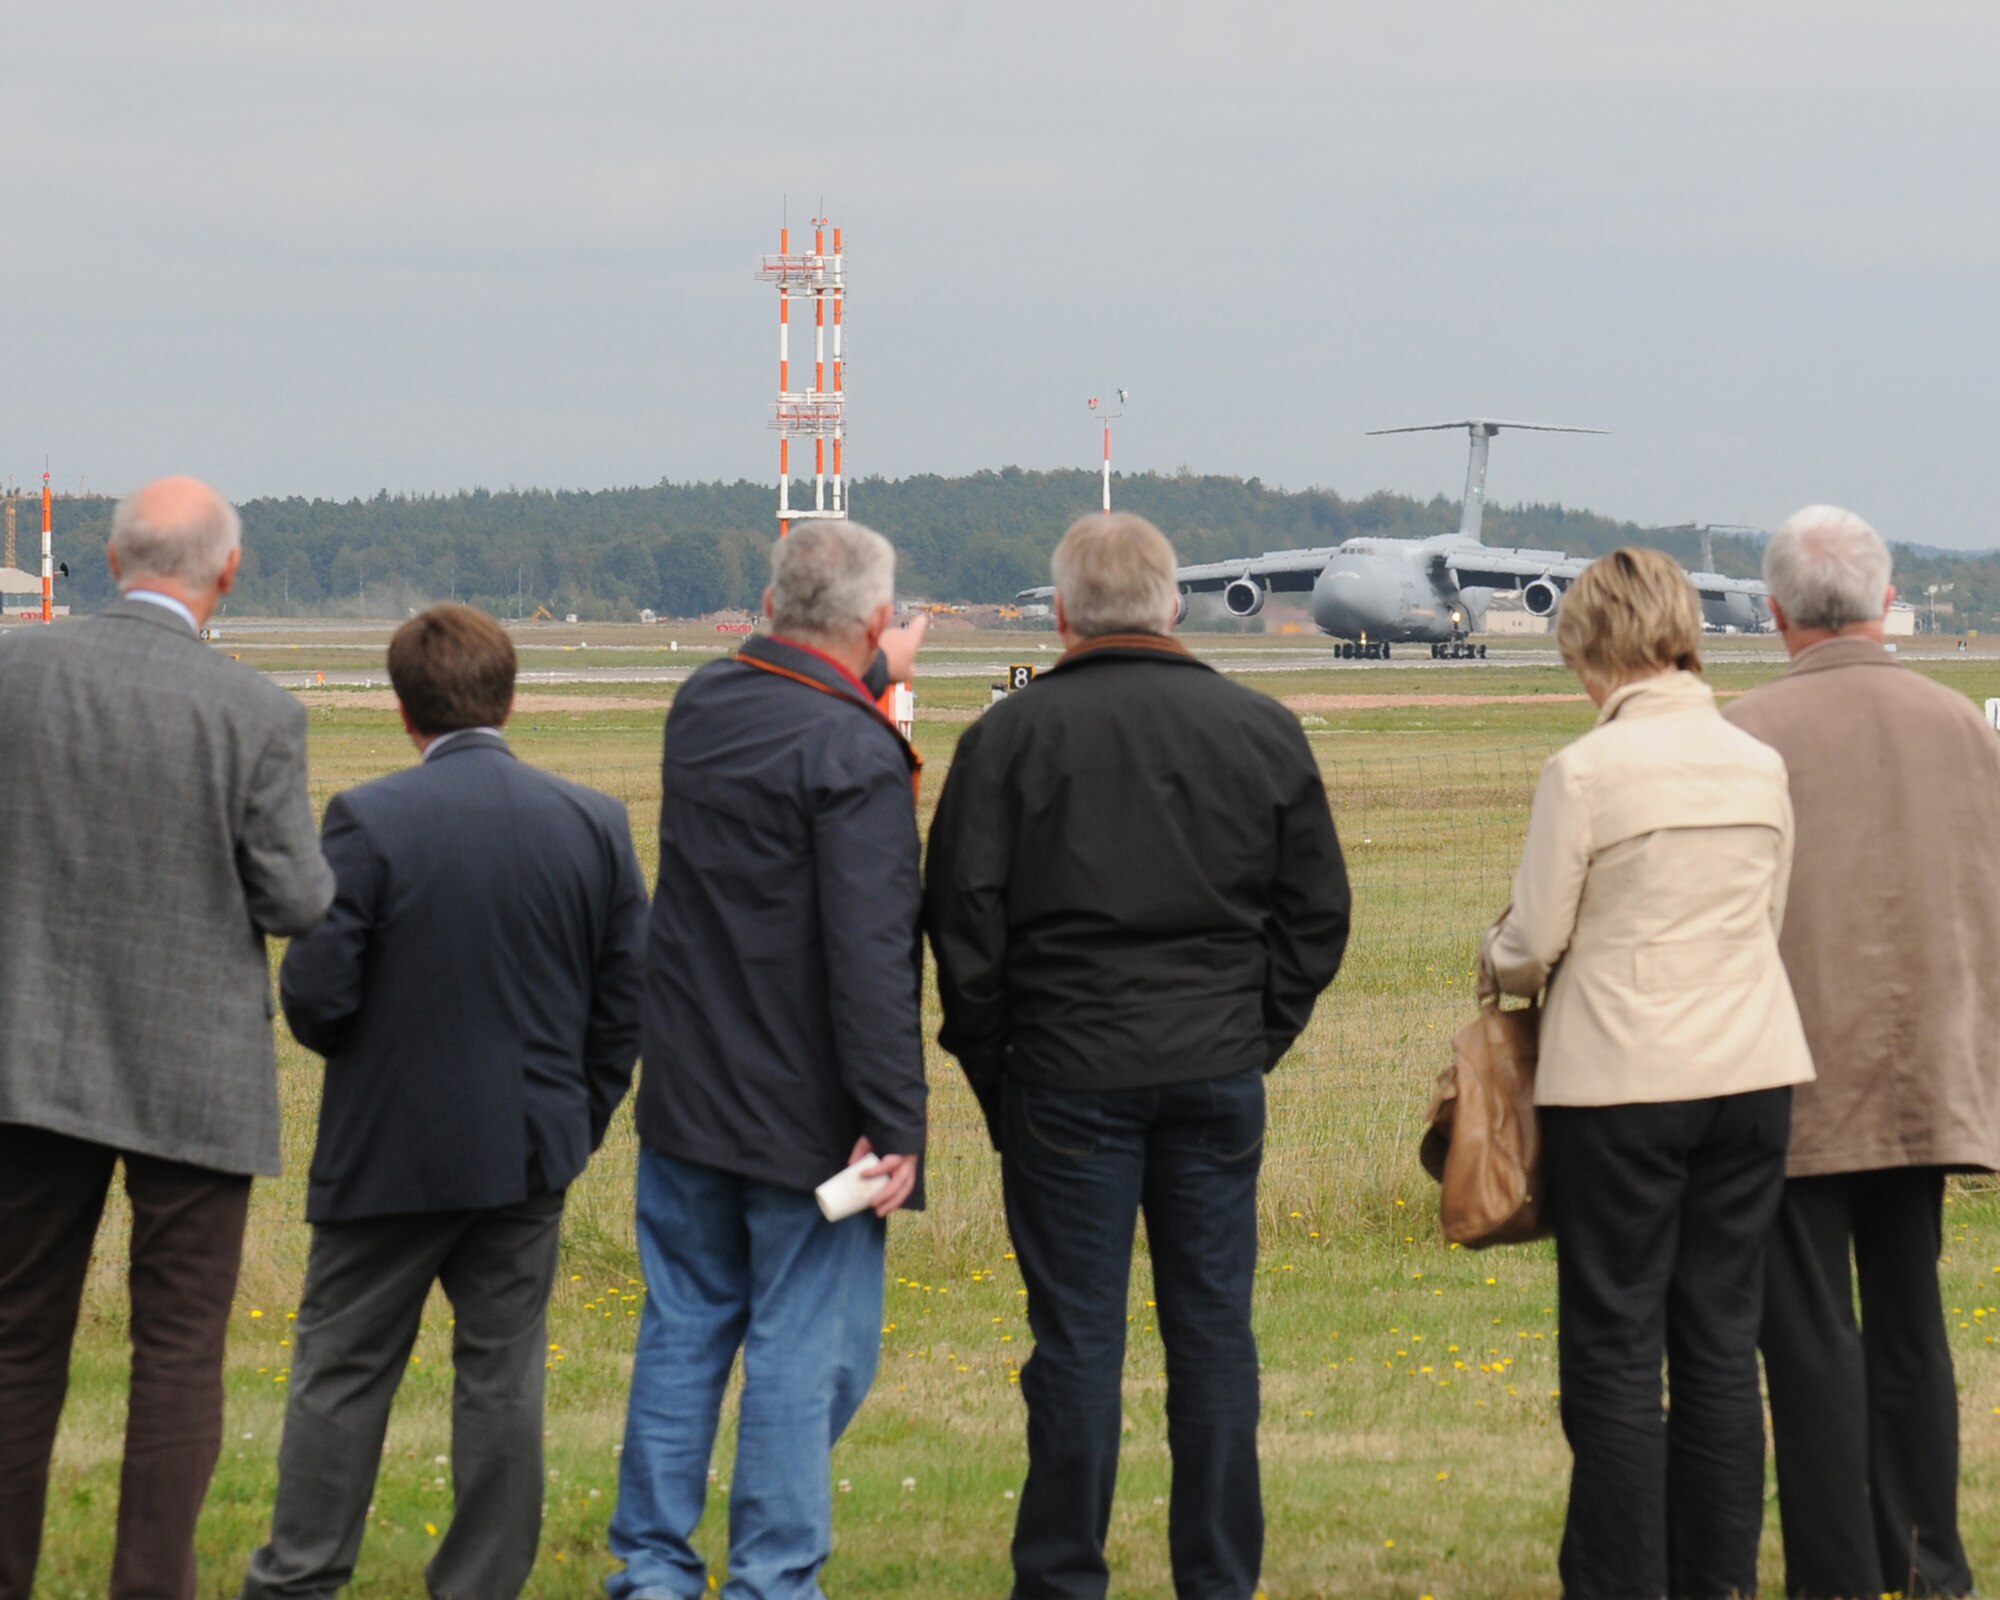 Members from the Combined Noise Abatement Committee and Spangdahlem Air Base, Germany, watch a C-5M acoustic demonstration on Ramstein Air Base, Germany, Sept. 30, 2009.  The CNAC consists of members of the Kaiserslautern Military Community and local German officials who regularly meet to discuss noise abatement issues in the community.  The meeting was followed by a briefing and demonstration that focused on the Air Force’s new C-5M.  Part of the Air Force's continual effort to modernize its inventory, the new model provides increased climb capability and produces less noise when compared to previous C-5 models. Ramstein is a major hub for mobility and airlift operations throughout Europe and downrange, and hosts a variety of other aircraft on its flightline, to include C-5s.  (U.S. Air Force photo by Tech. Sgt. Sean Mateo White)